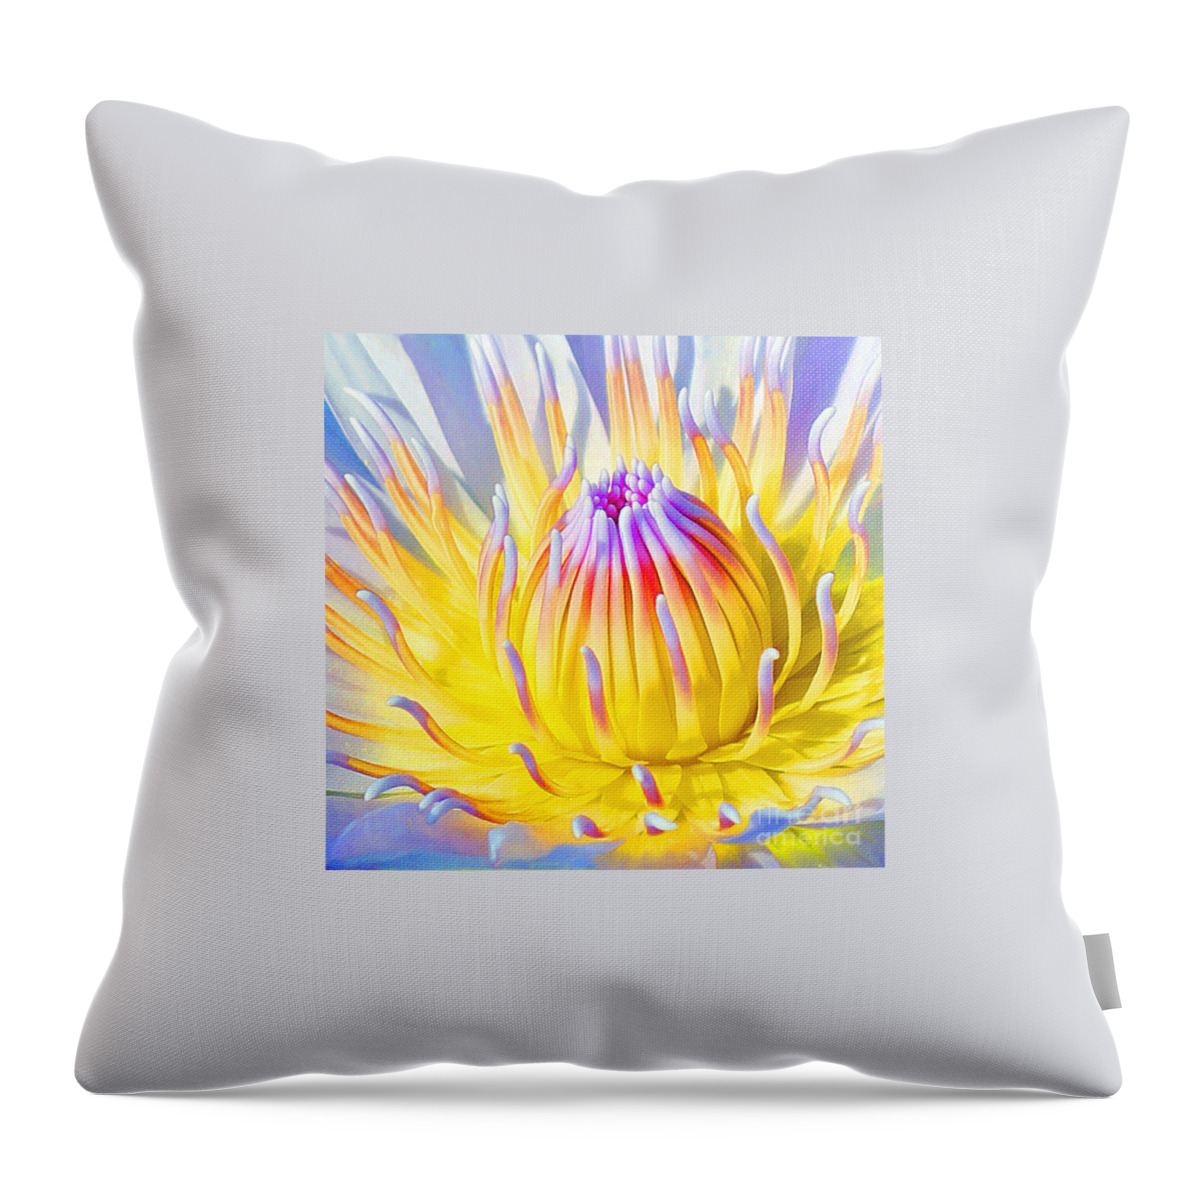  Blue Lotuses Throw Pillow featuring the photograph Blue Yellow Lily by Jennifer Robin